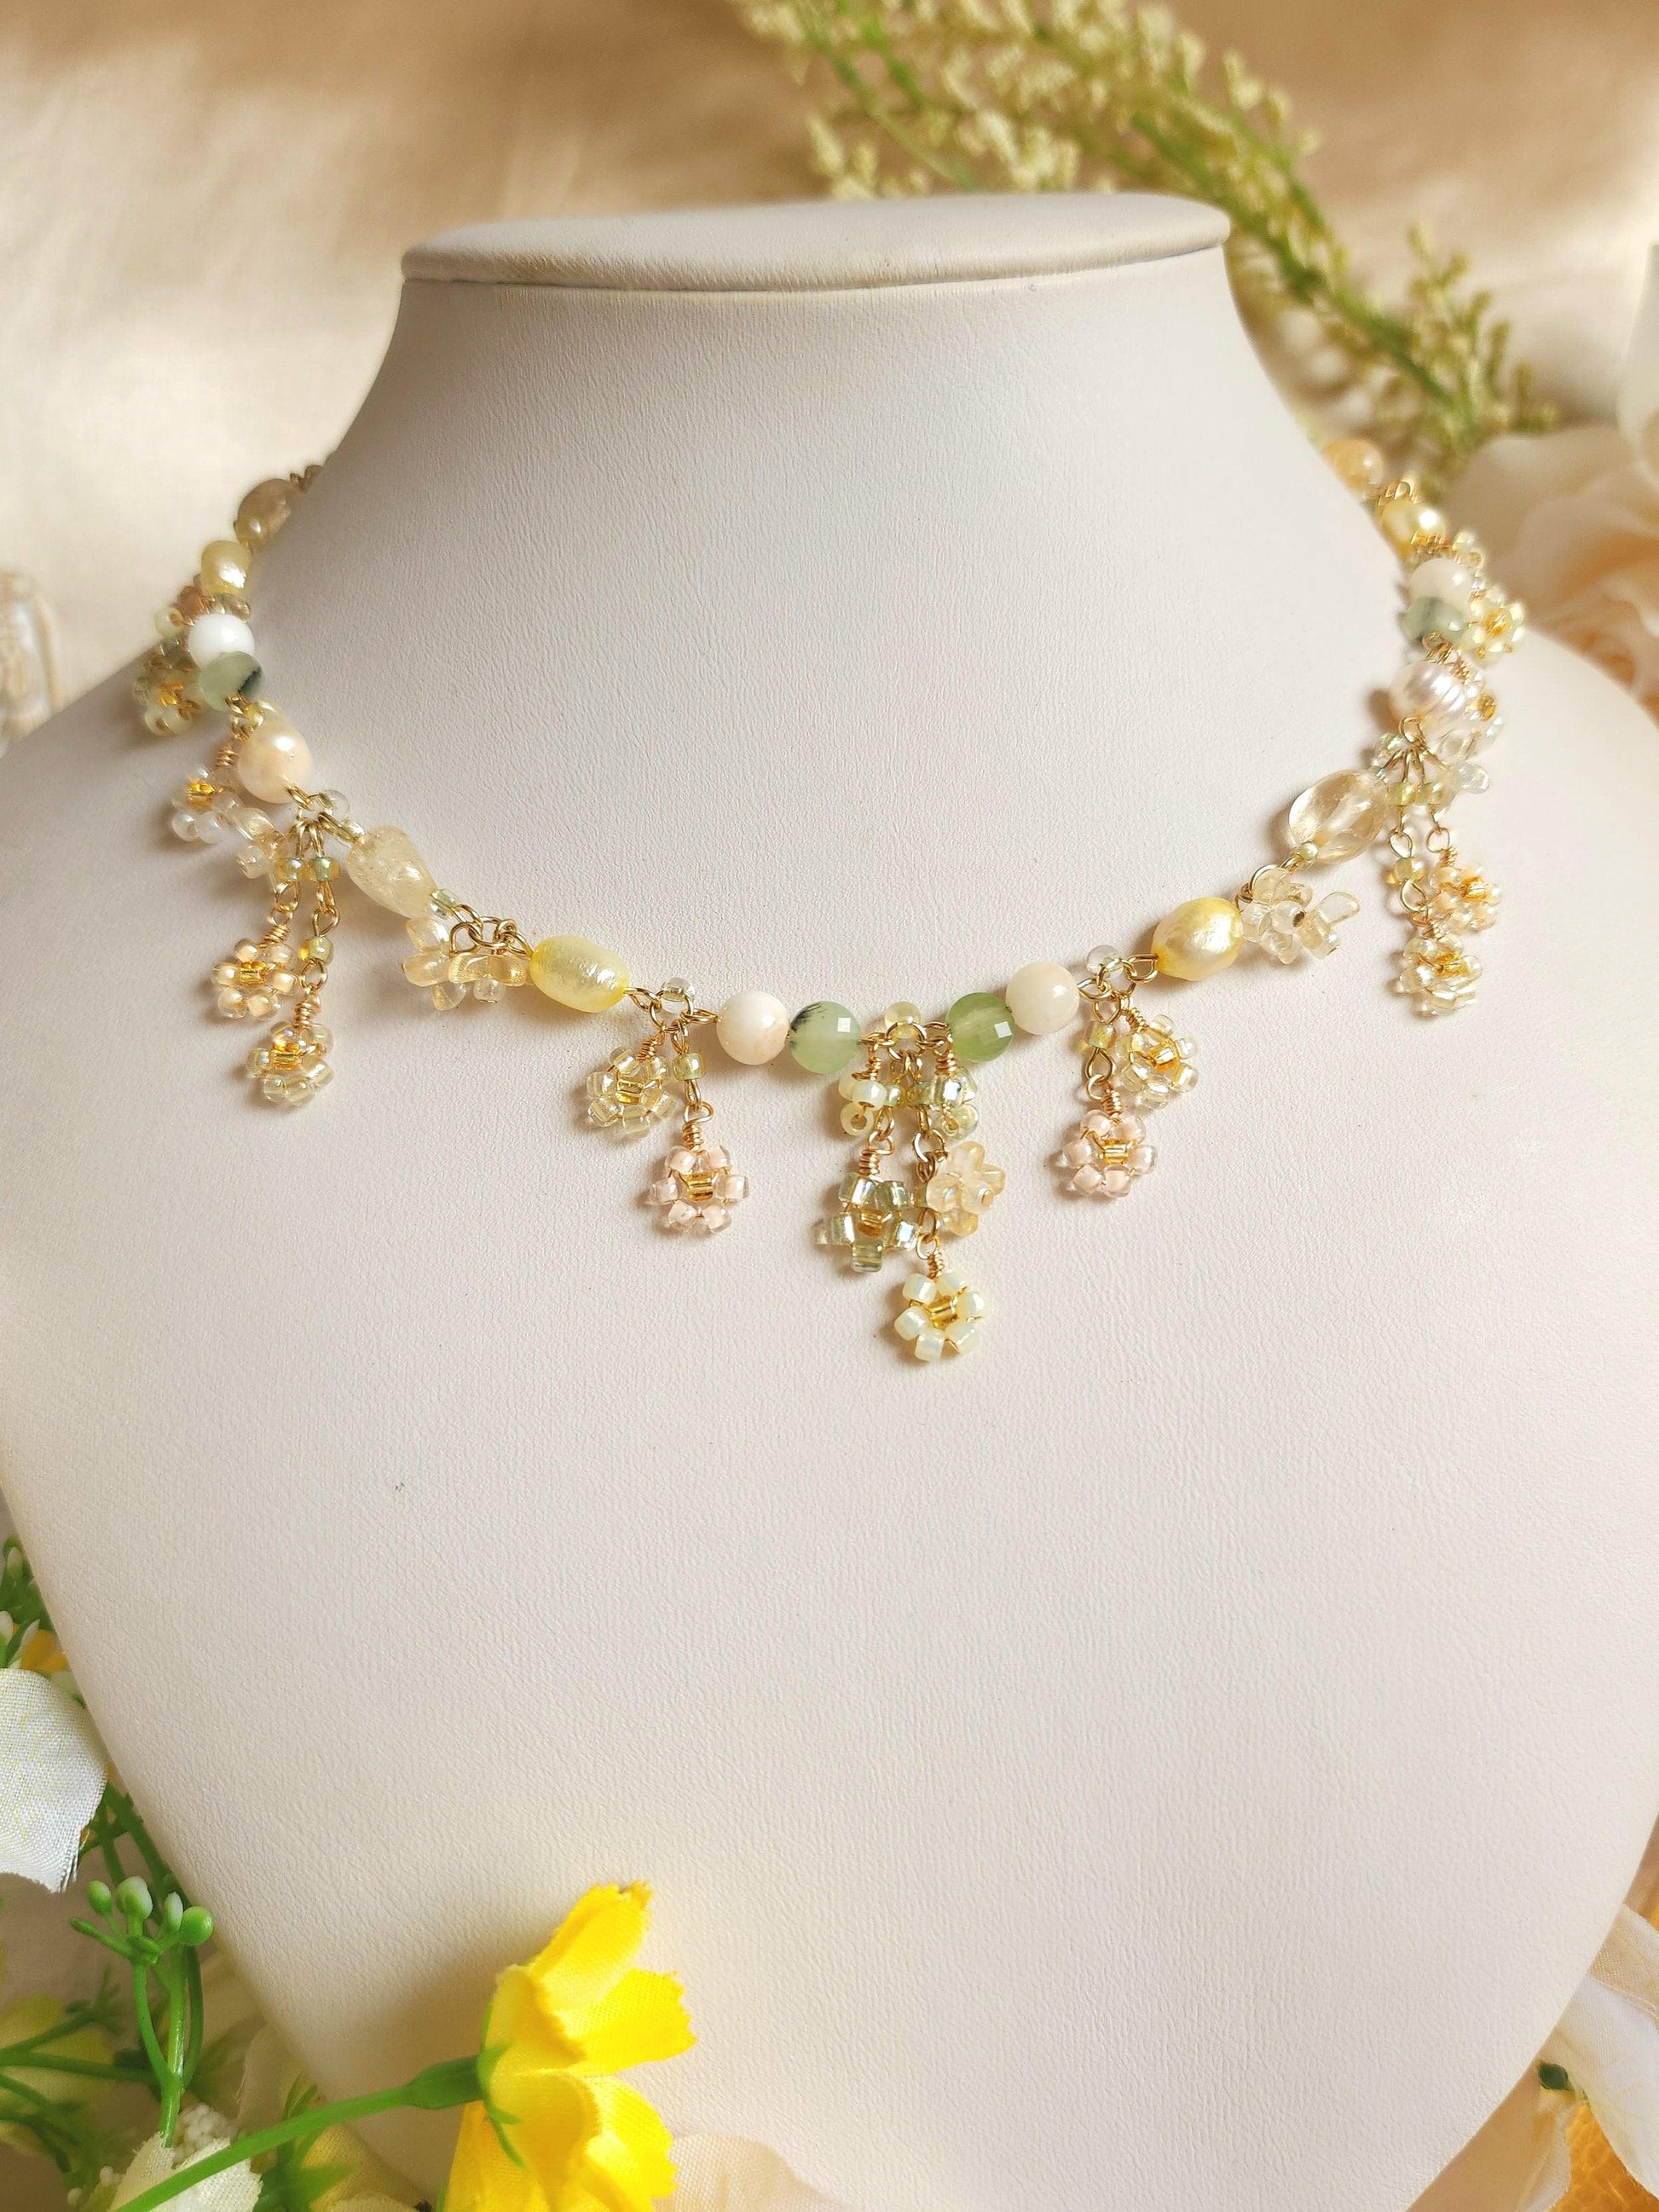 'Picnic in a Flower Field' Floral Bouquet Necklace - By Cocoyu